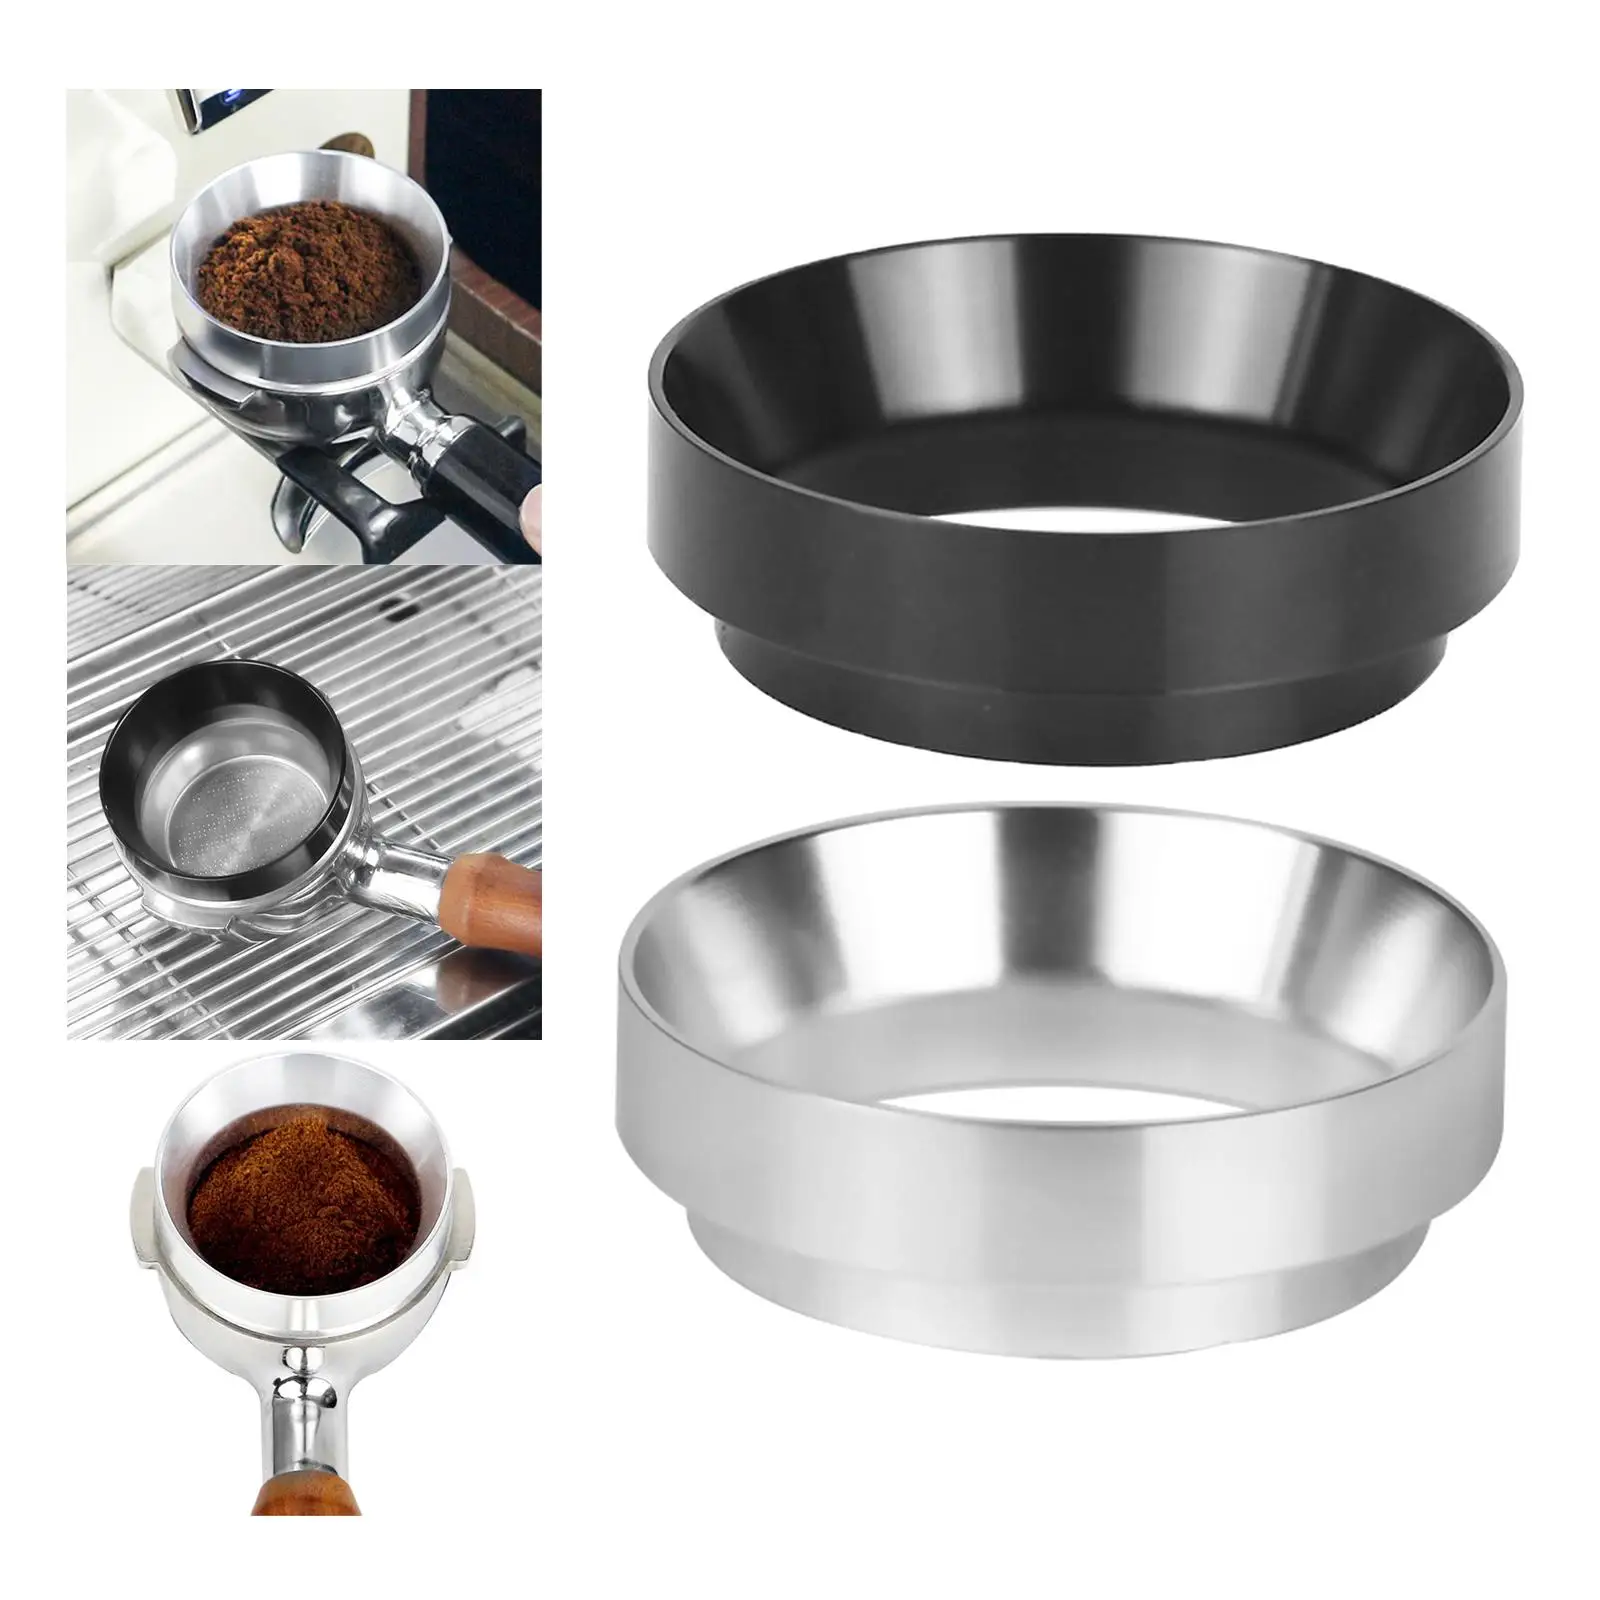 51mm Coffee Dosing Rings Coffeeware Cafe Tools for Brewing Bowl Tampers